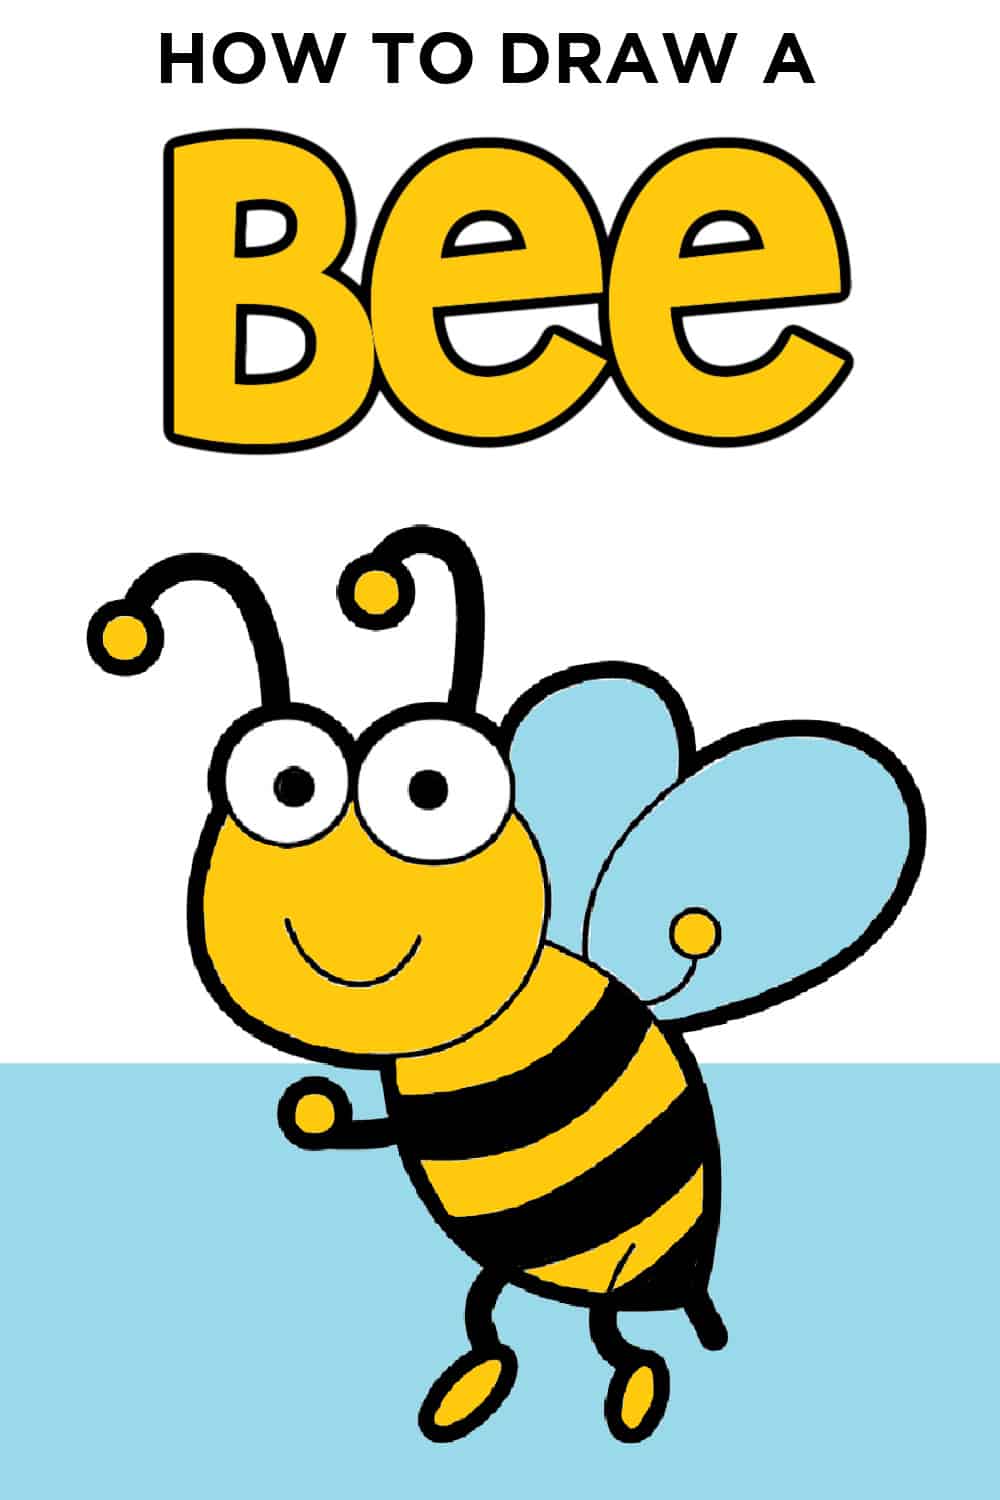 https://www.madewithhappy.com/wp-content/uploads/bee-drawings.jpg